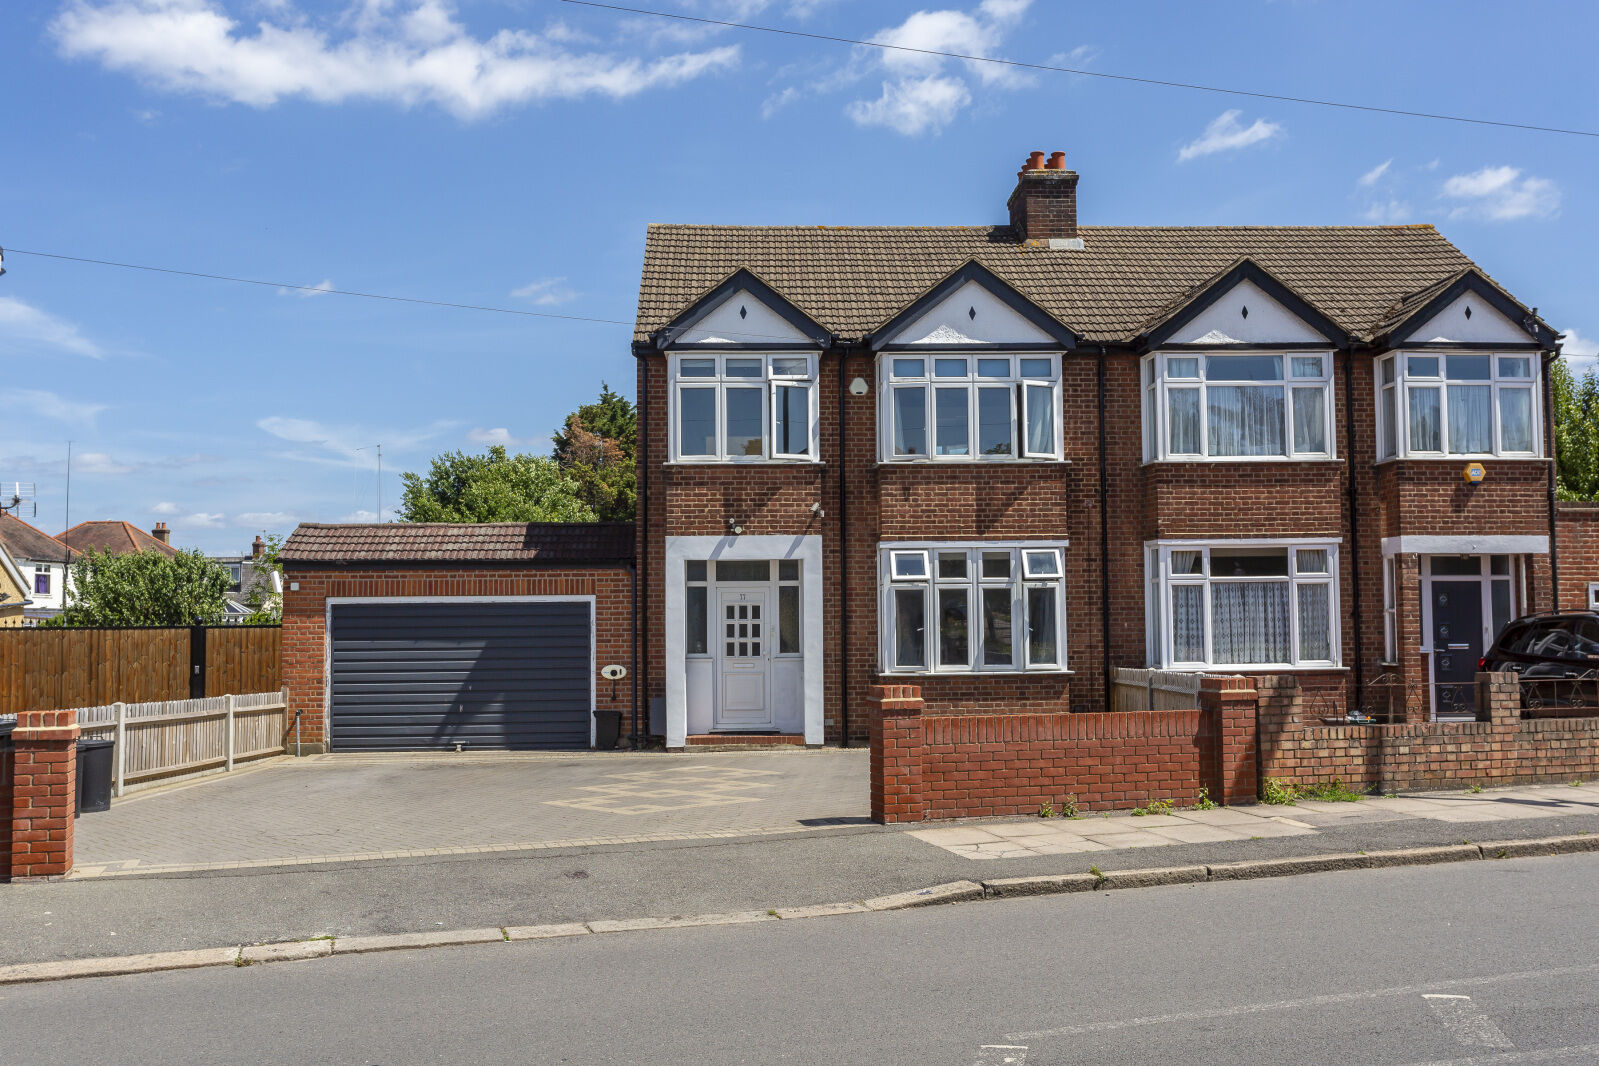 3 bedroom semi detached house for sale The Drive, Morden, SM4, main image